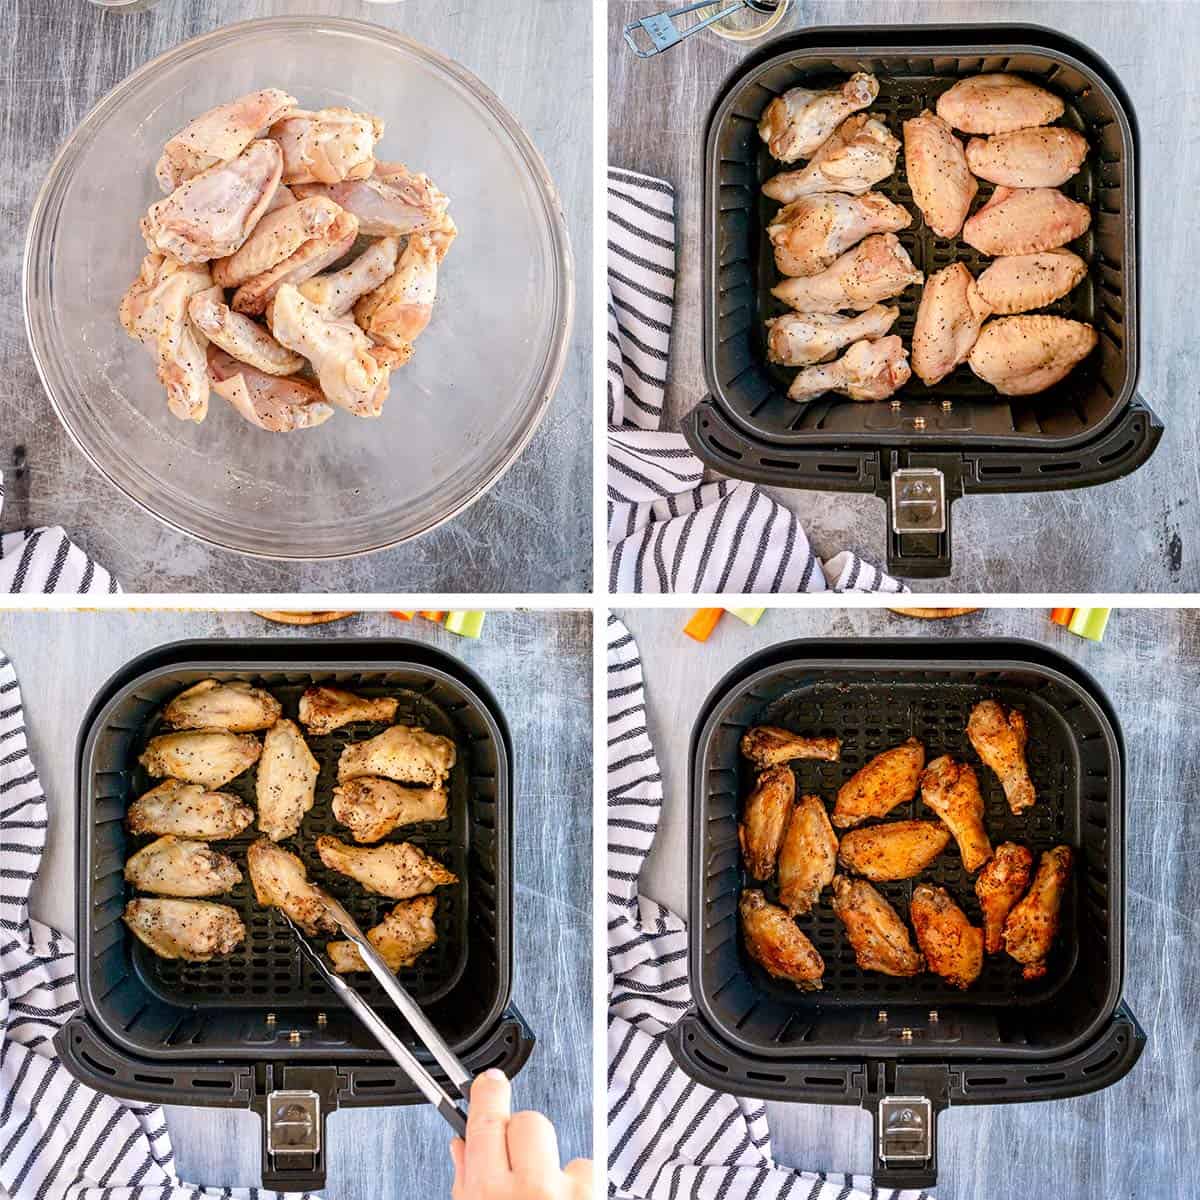 Chicken wings are seasoned in a bowl and cooked in an air fryer.